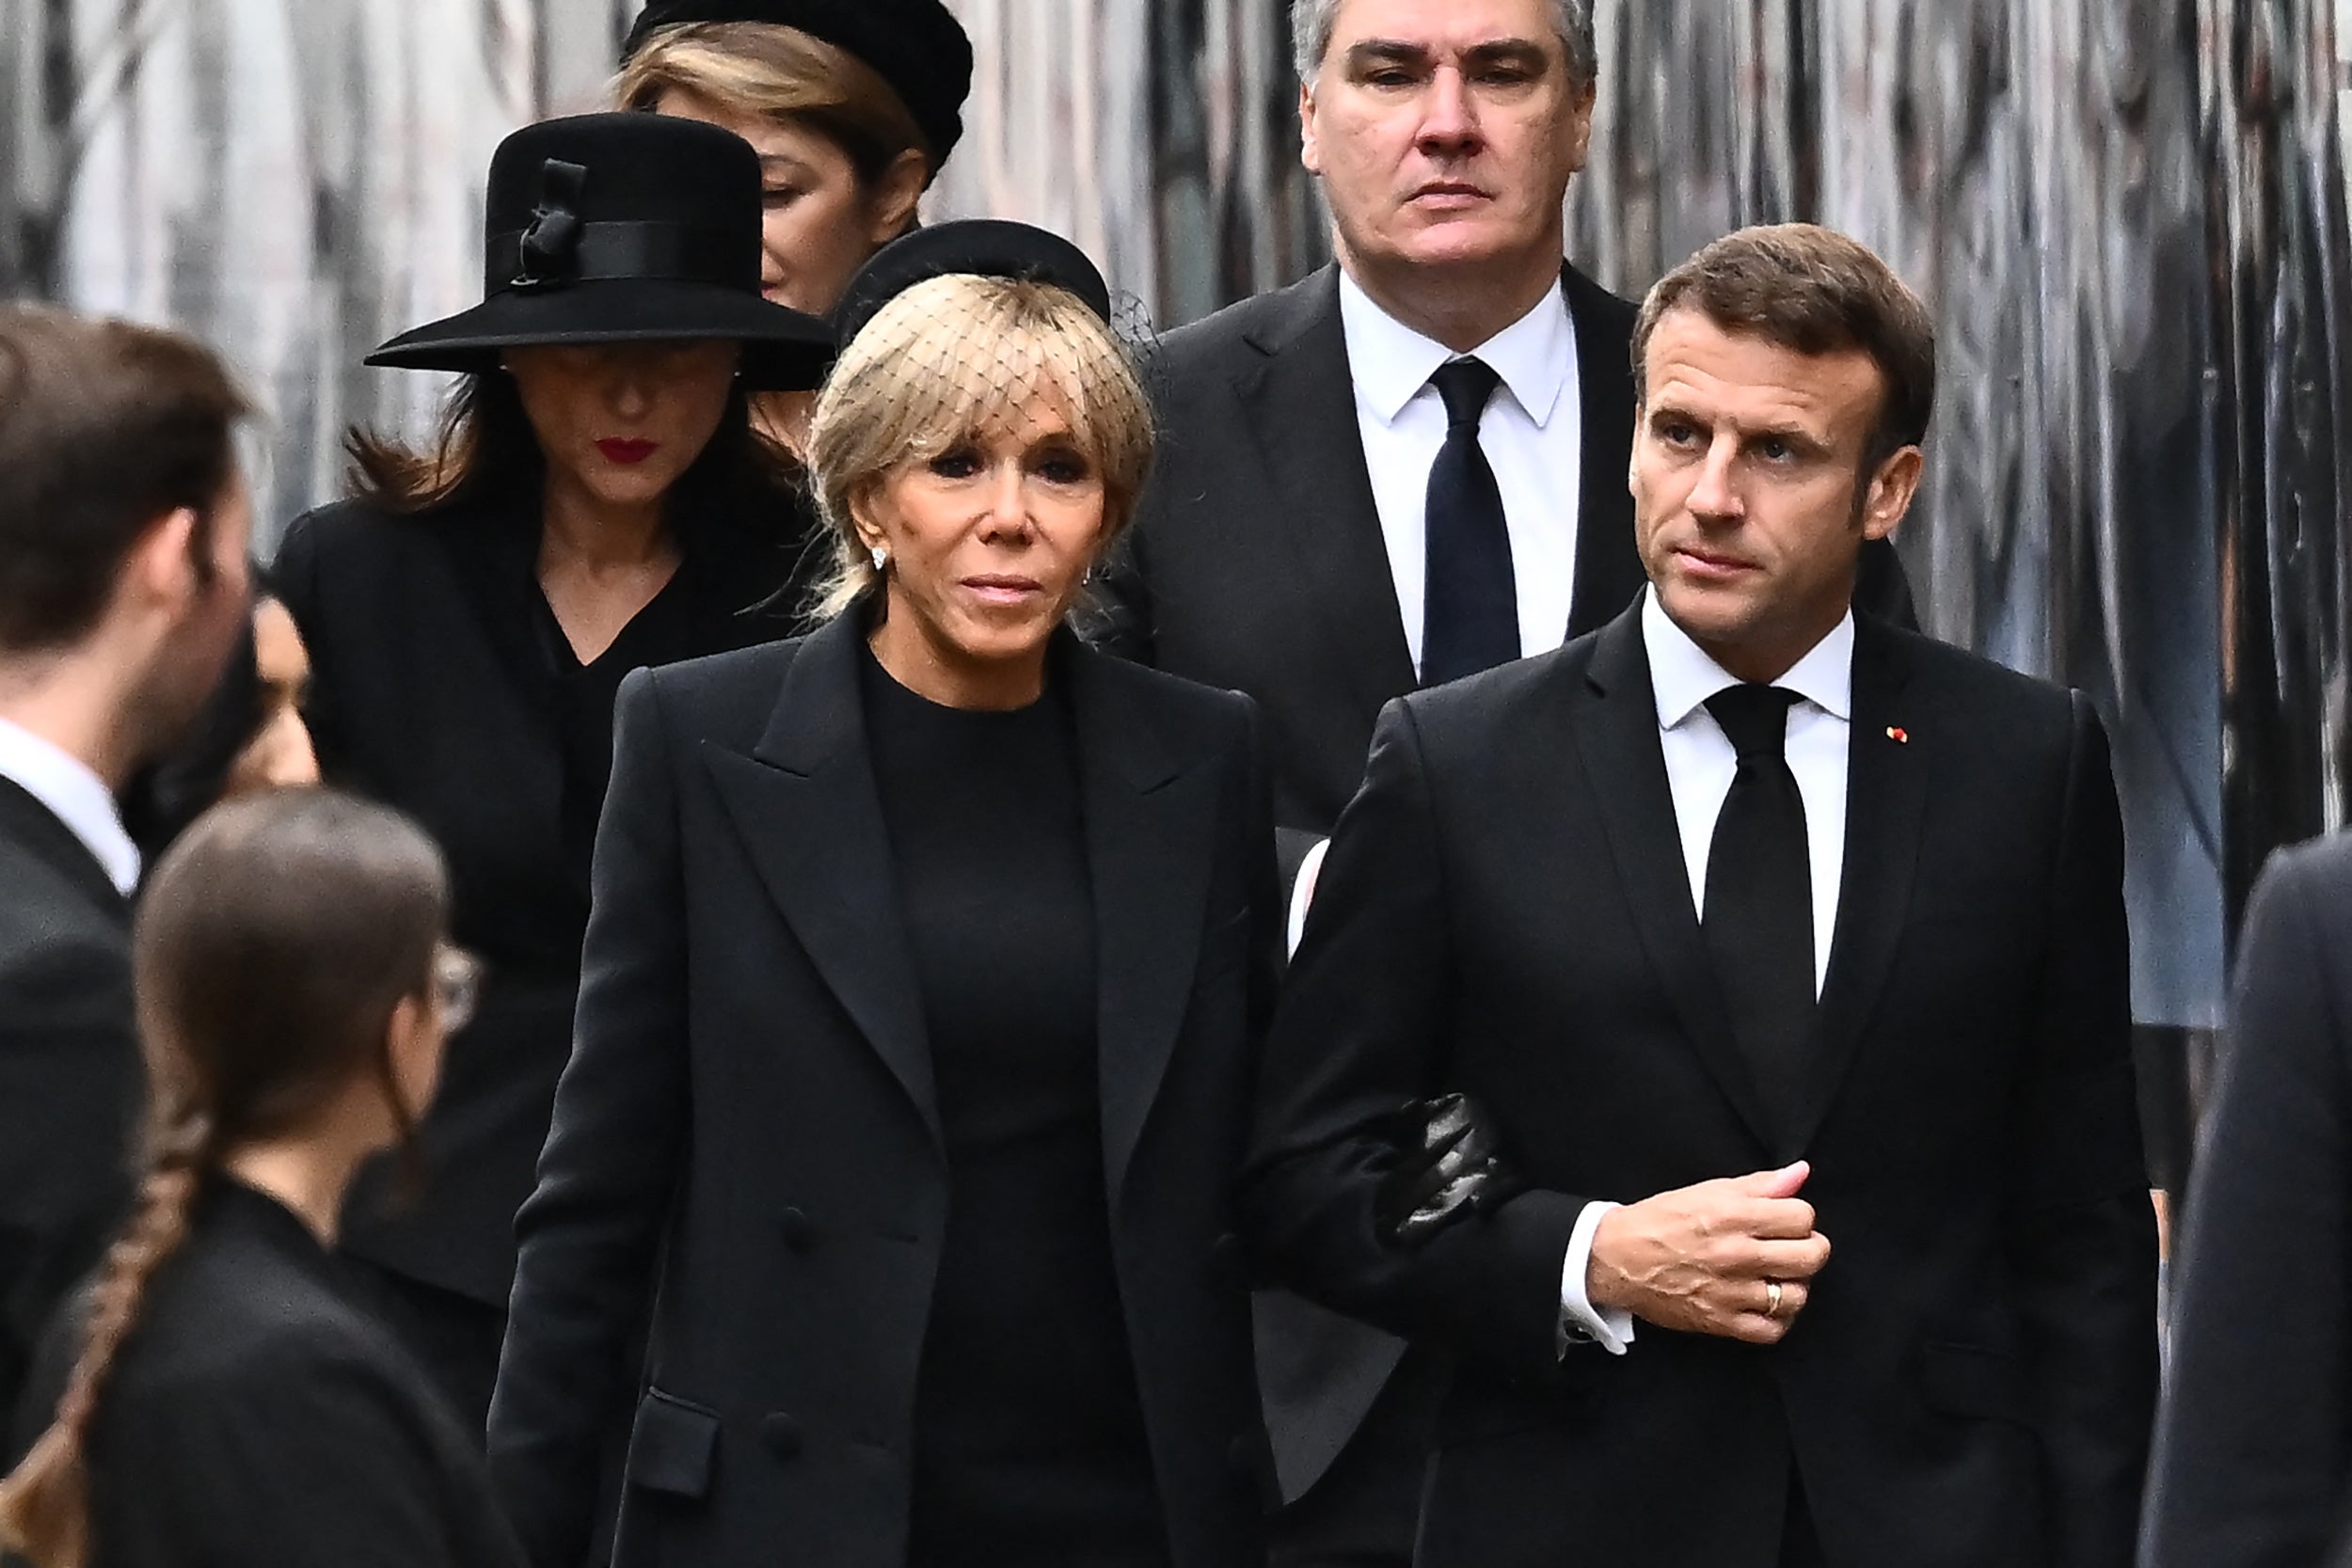 French President Emmanuel Macron (R) and his wife Brigitte Macron arrive at Westminster Abbey